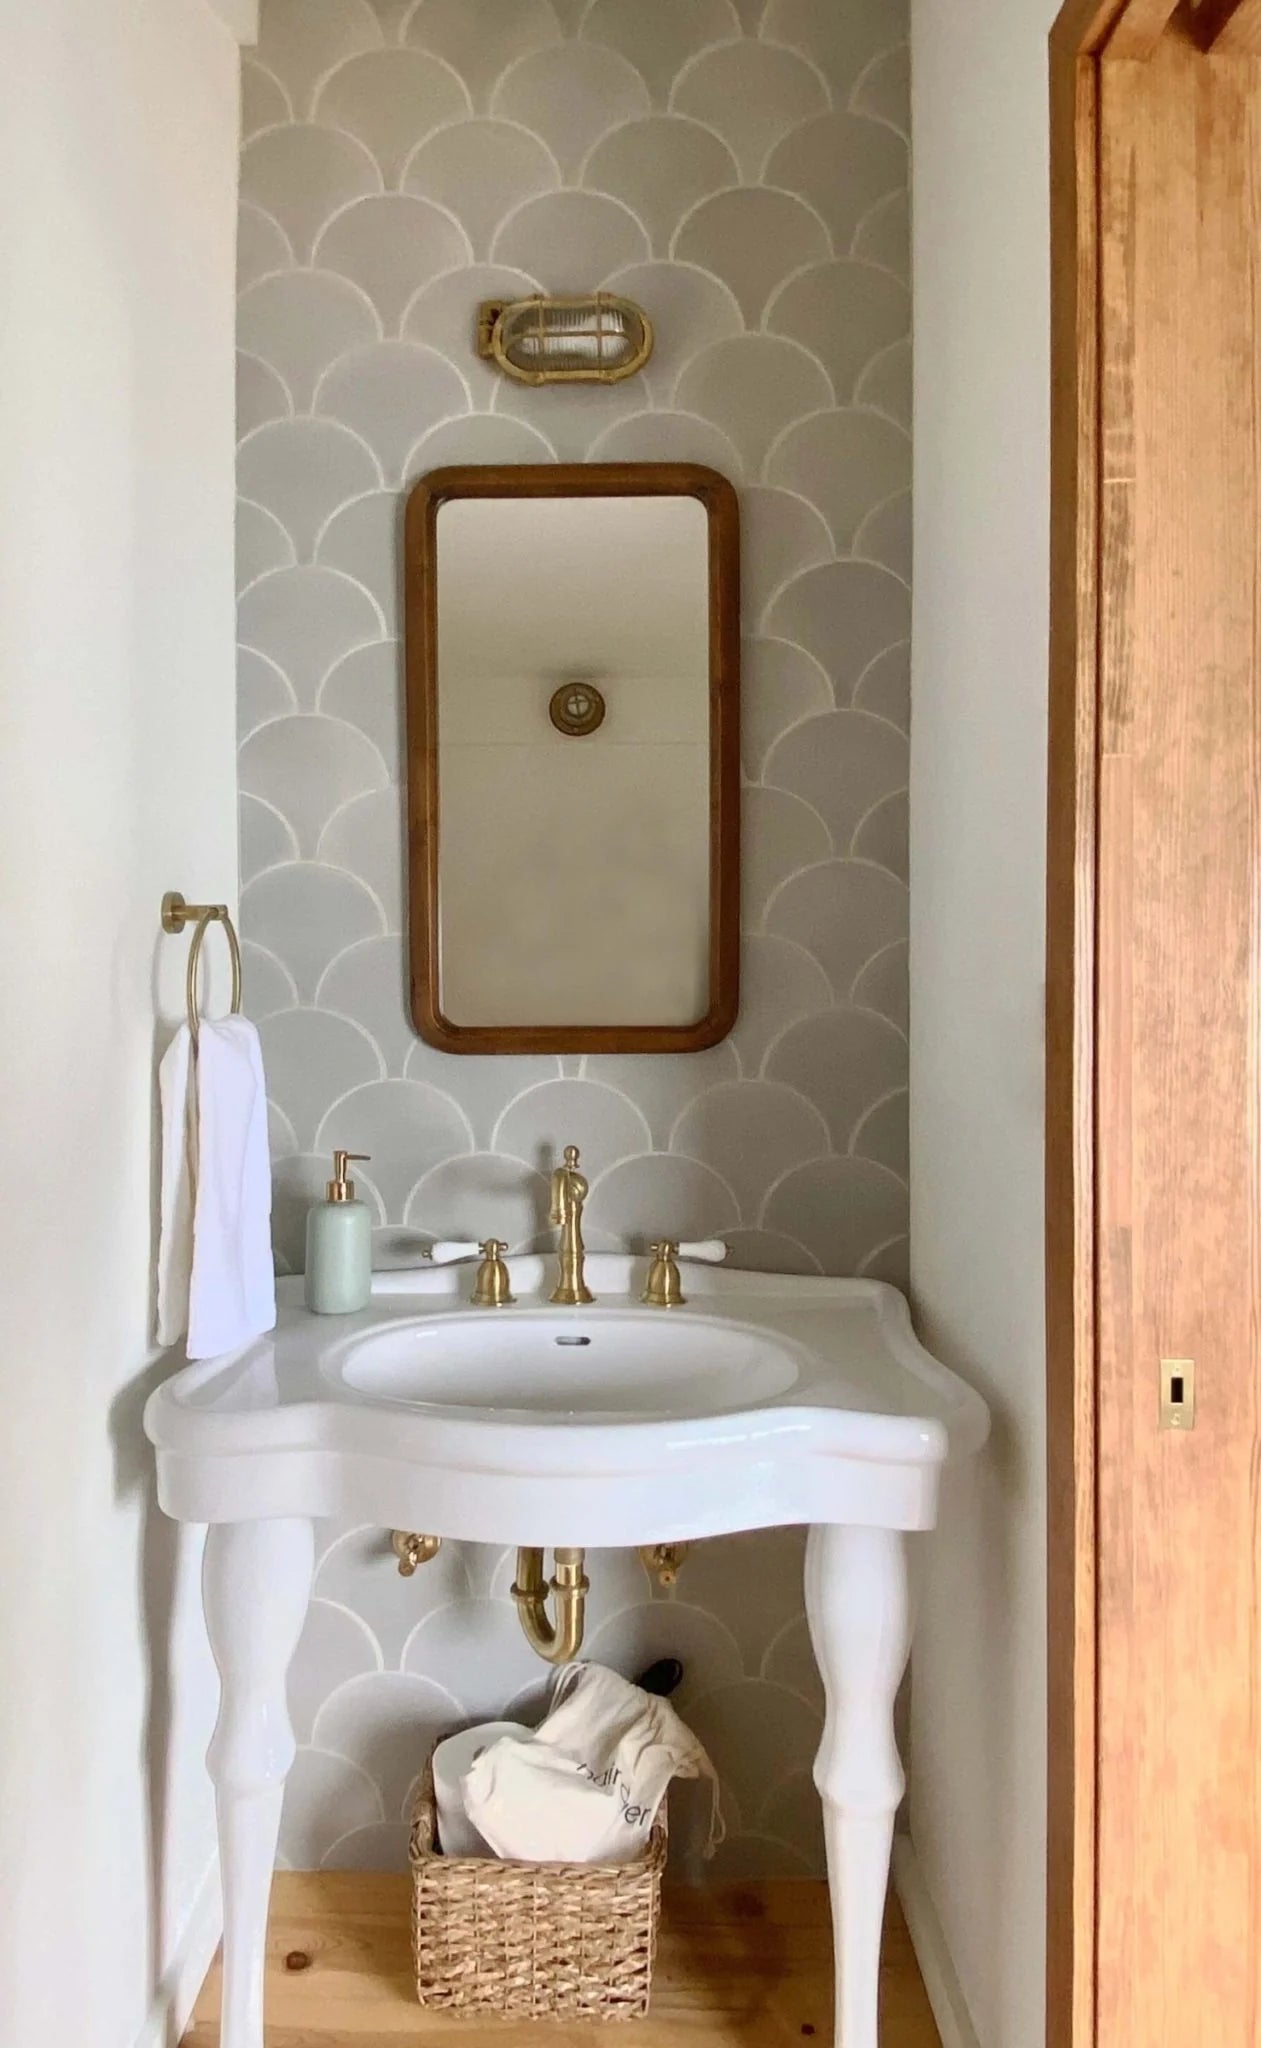 cle-tile-encaustic-cement-solid-scallop-ash-bathroom-wall-backsplash-location-_tomalesbaycottage-design-and-photography-sophia-lin-_designsilverlake-commercial-FINAL-1-1261x2048.webp__PID:b7d2c6c1-50c1-43ee-bf83-3b4a30e2aef1